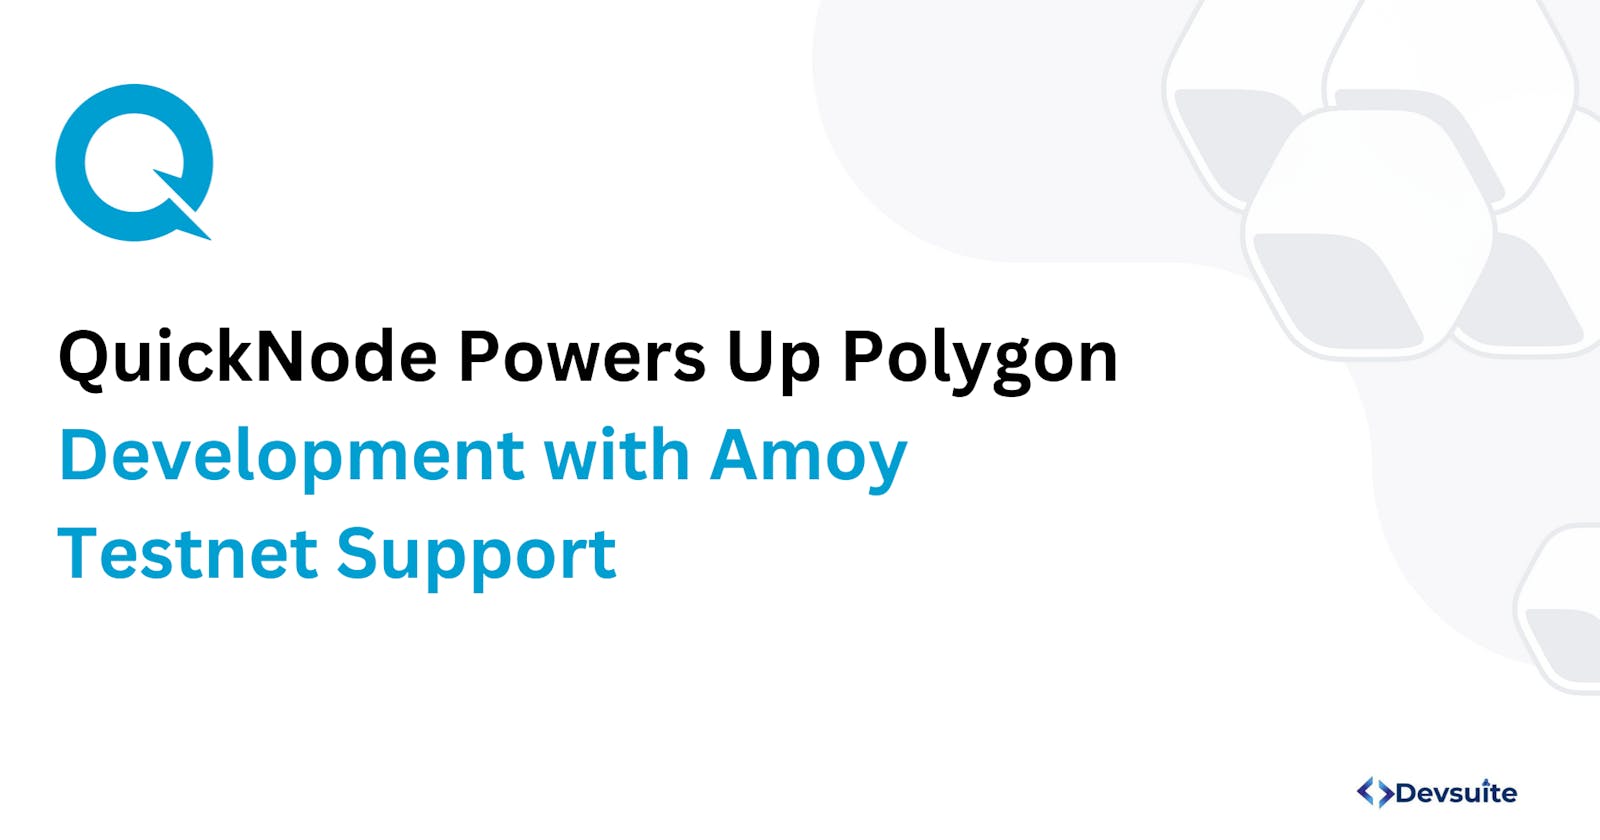 QuickNode Powers Up Polygon Development with Amoy Testnet Support